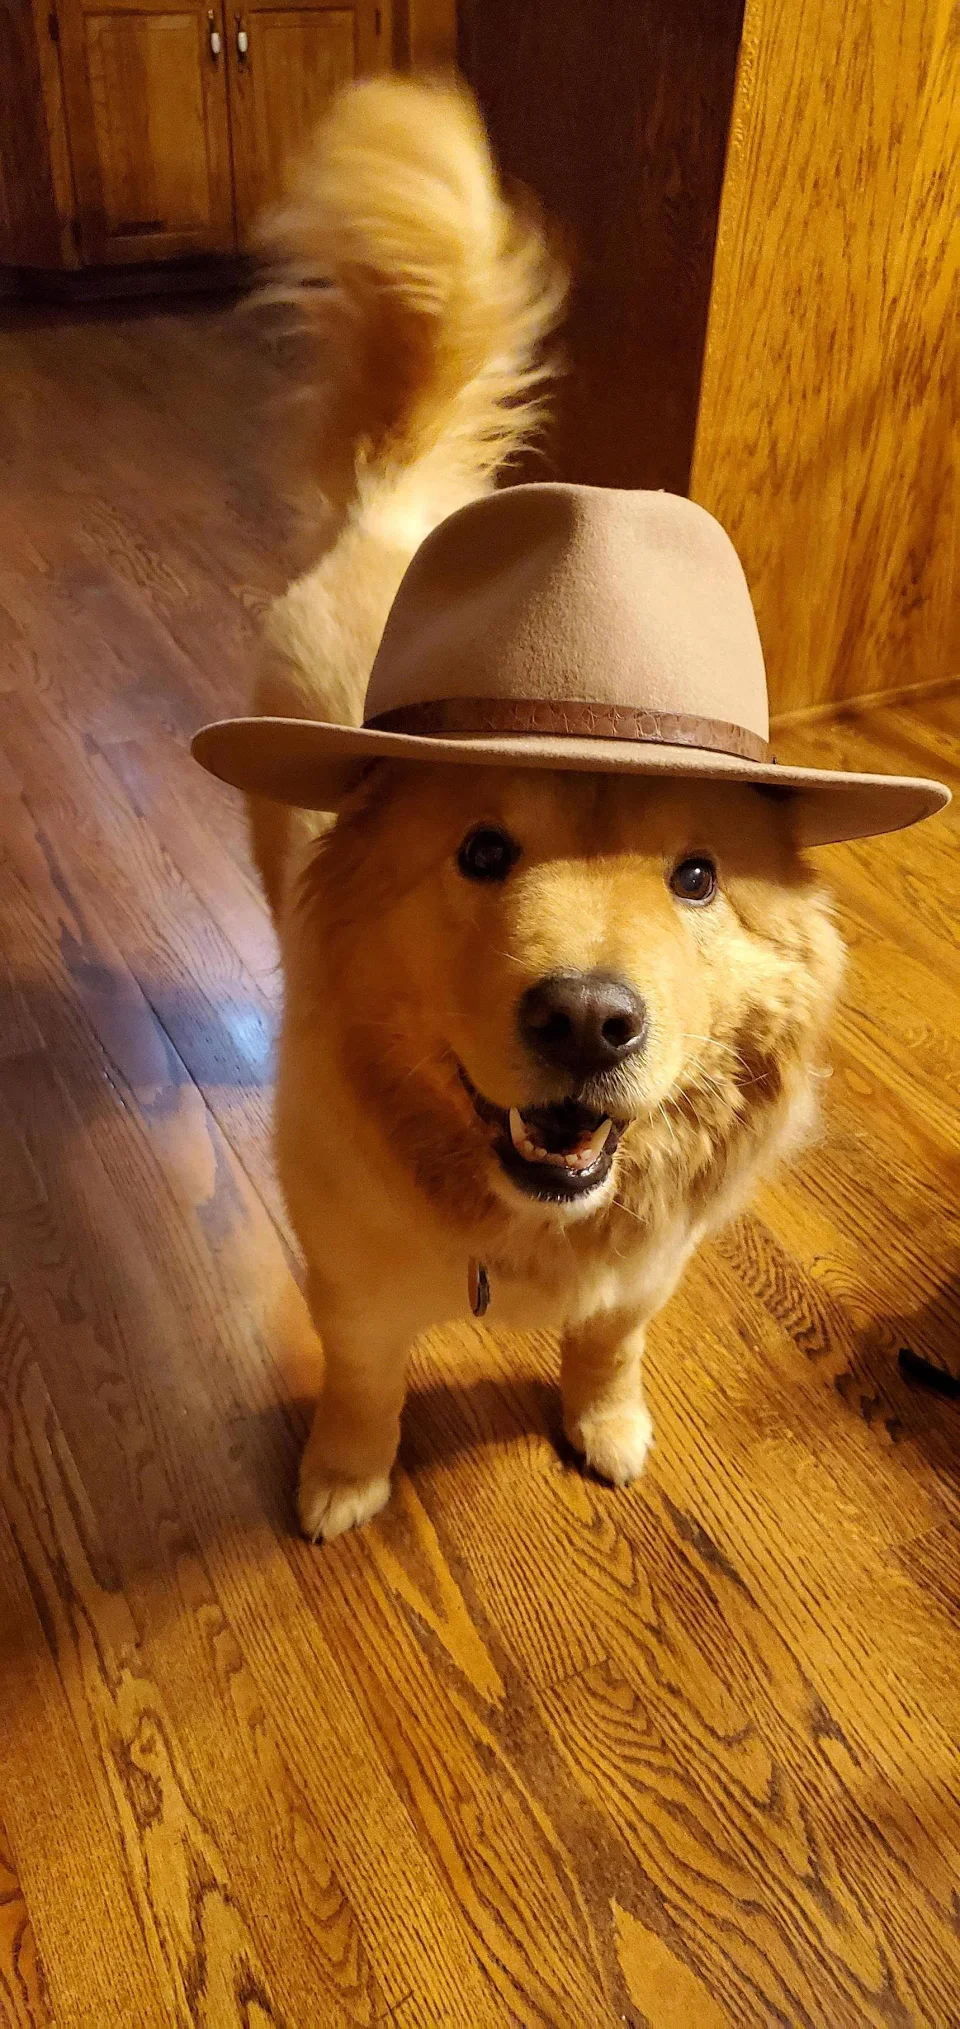 I like to put hats on my Father dog, and she likes to wear them